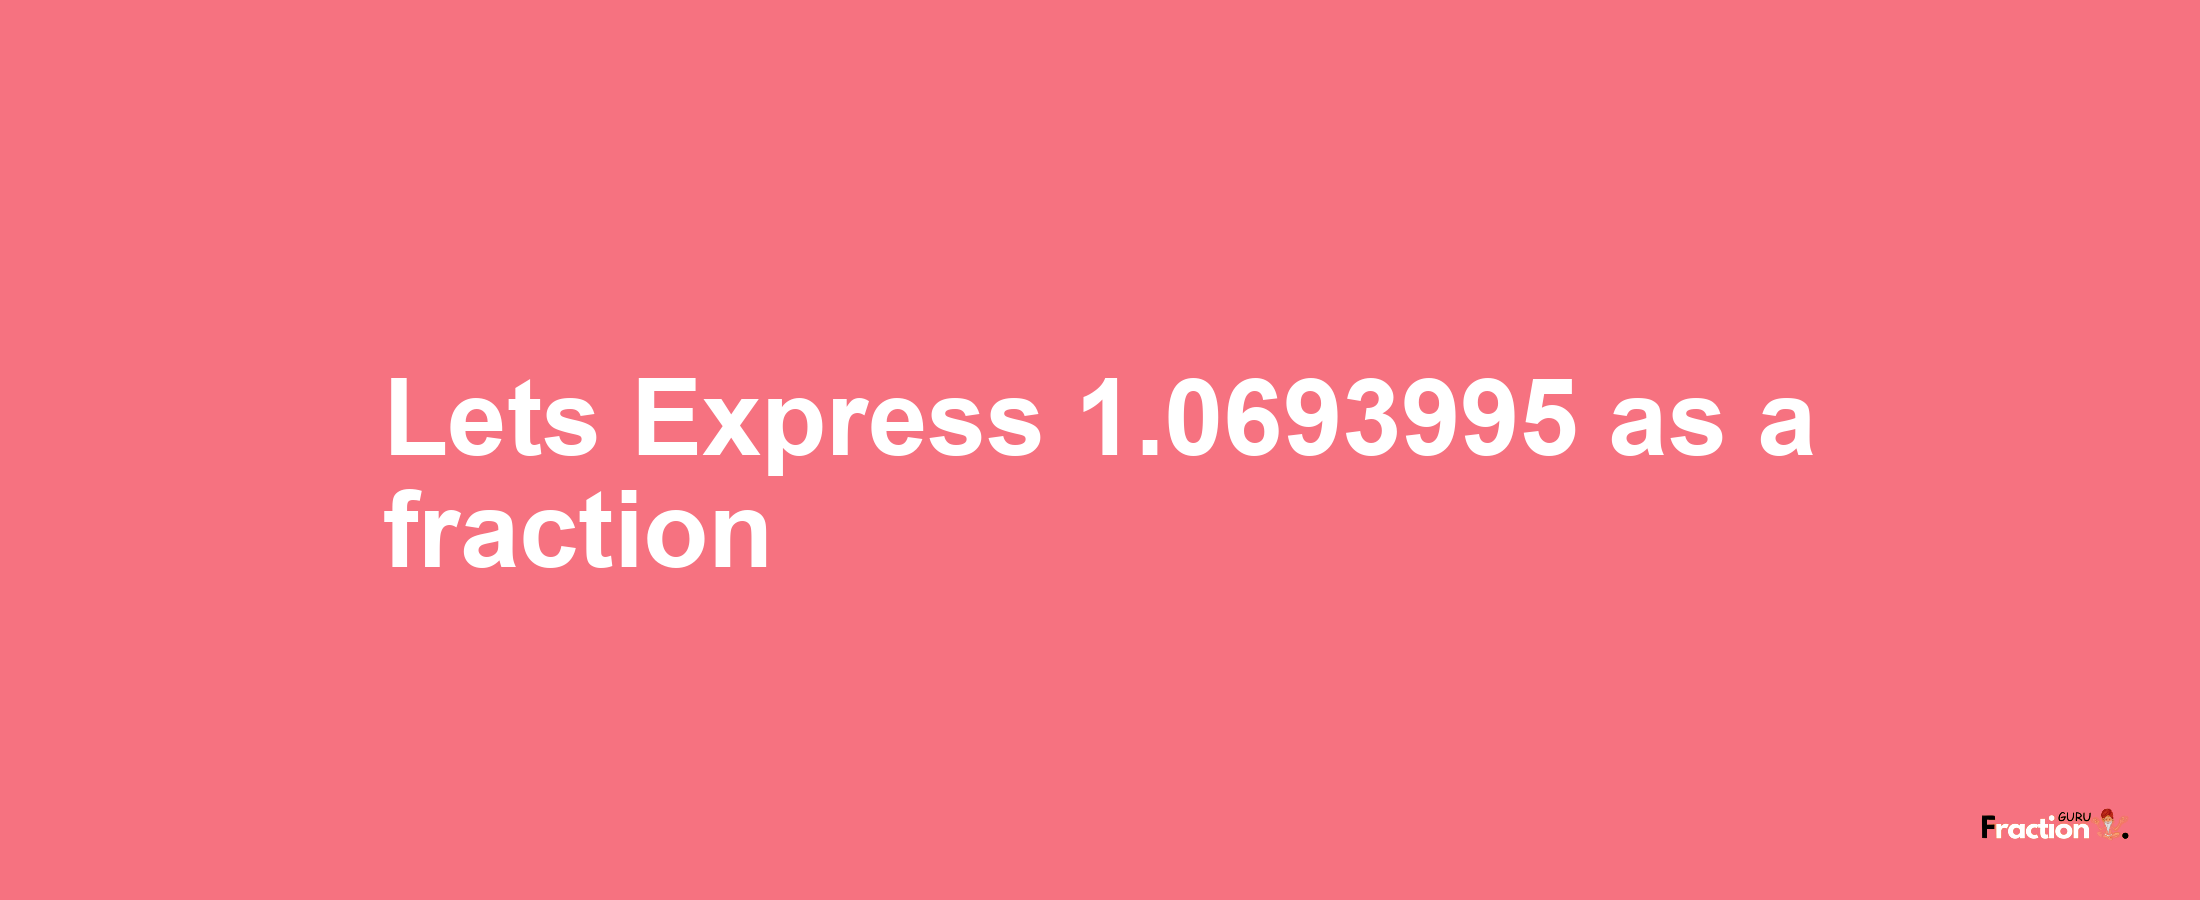 Lets Express 1.0693995 as afraction